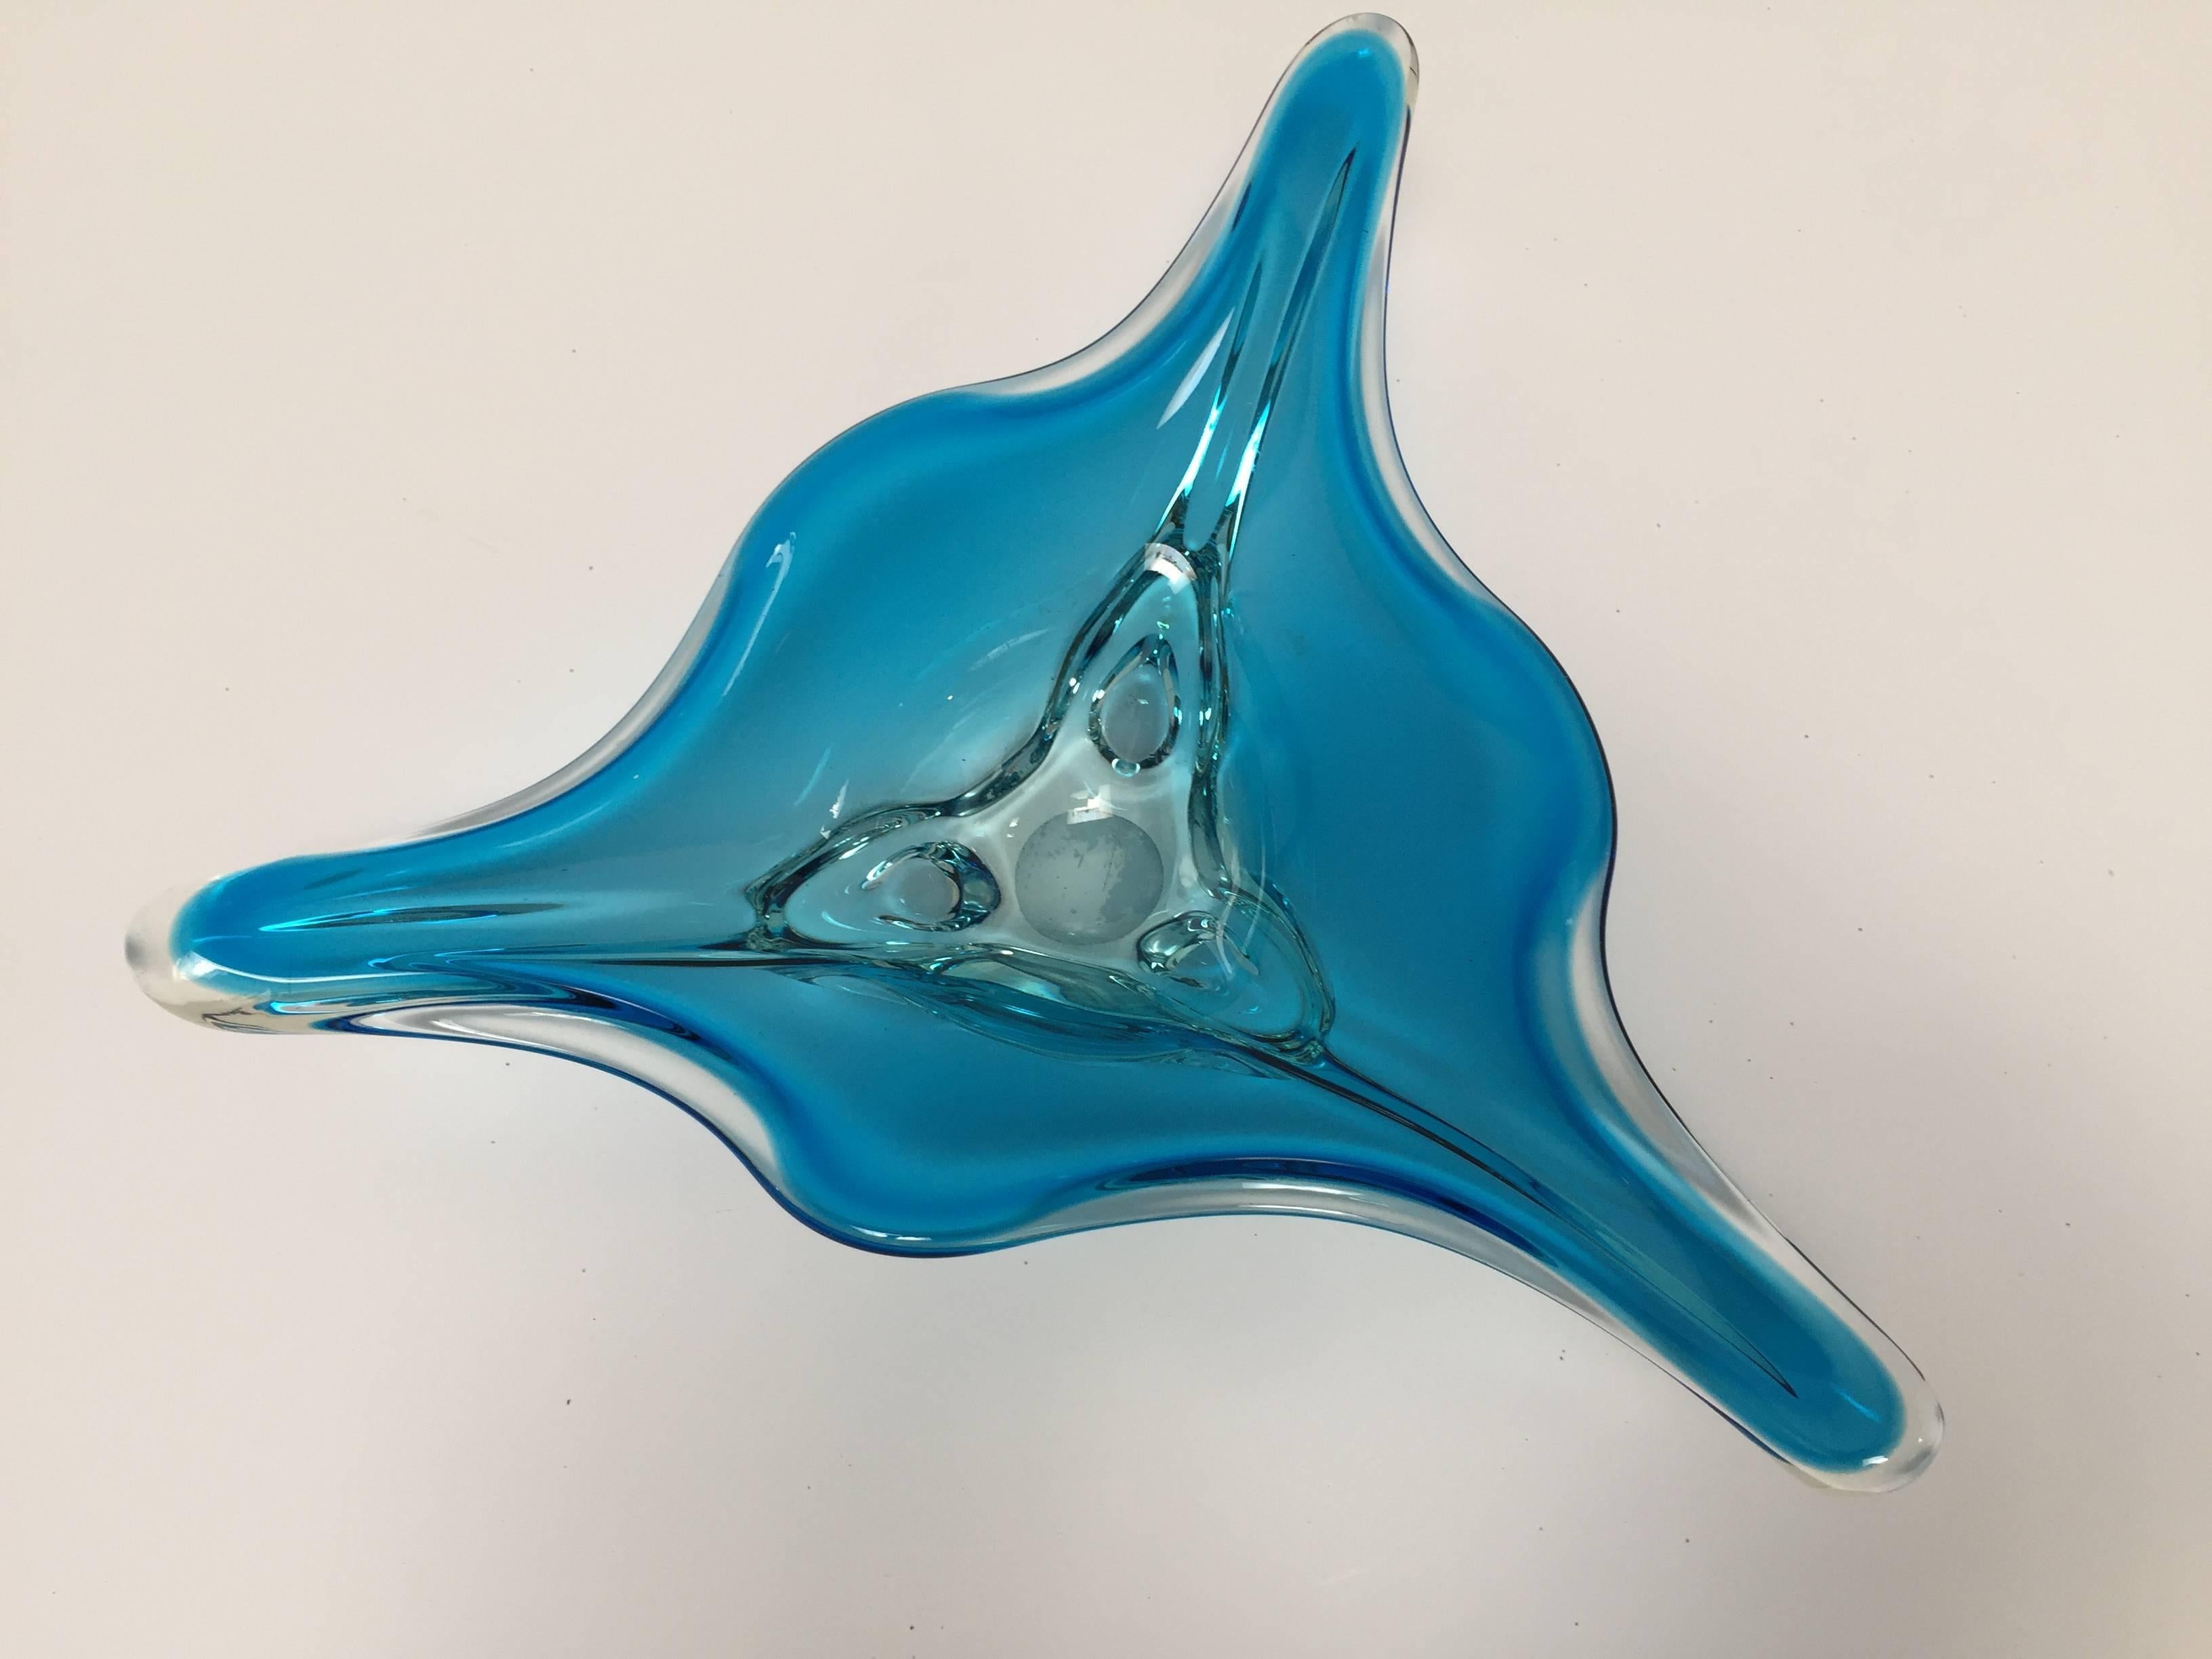 This large exquisite modern decorative handblown Murano art glass bowl with a radiating stylized trefoil design in an amazing aqua blue glass and clear glass.
Beautiful Murano Mid-Century handblown decorative bowl in a thick elongated triangular